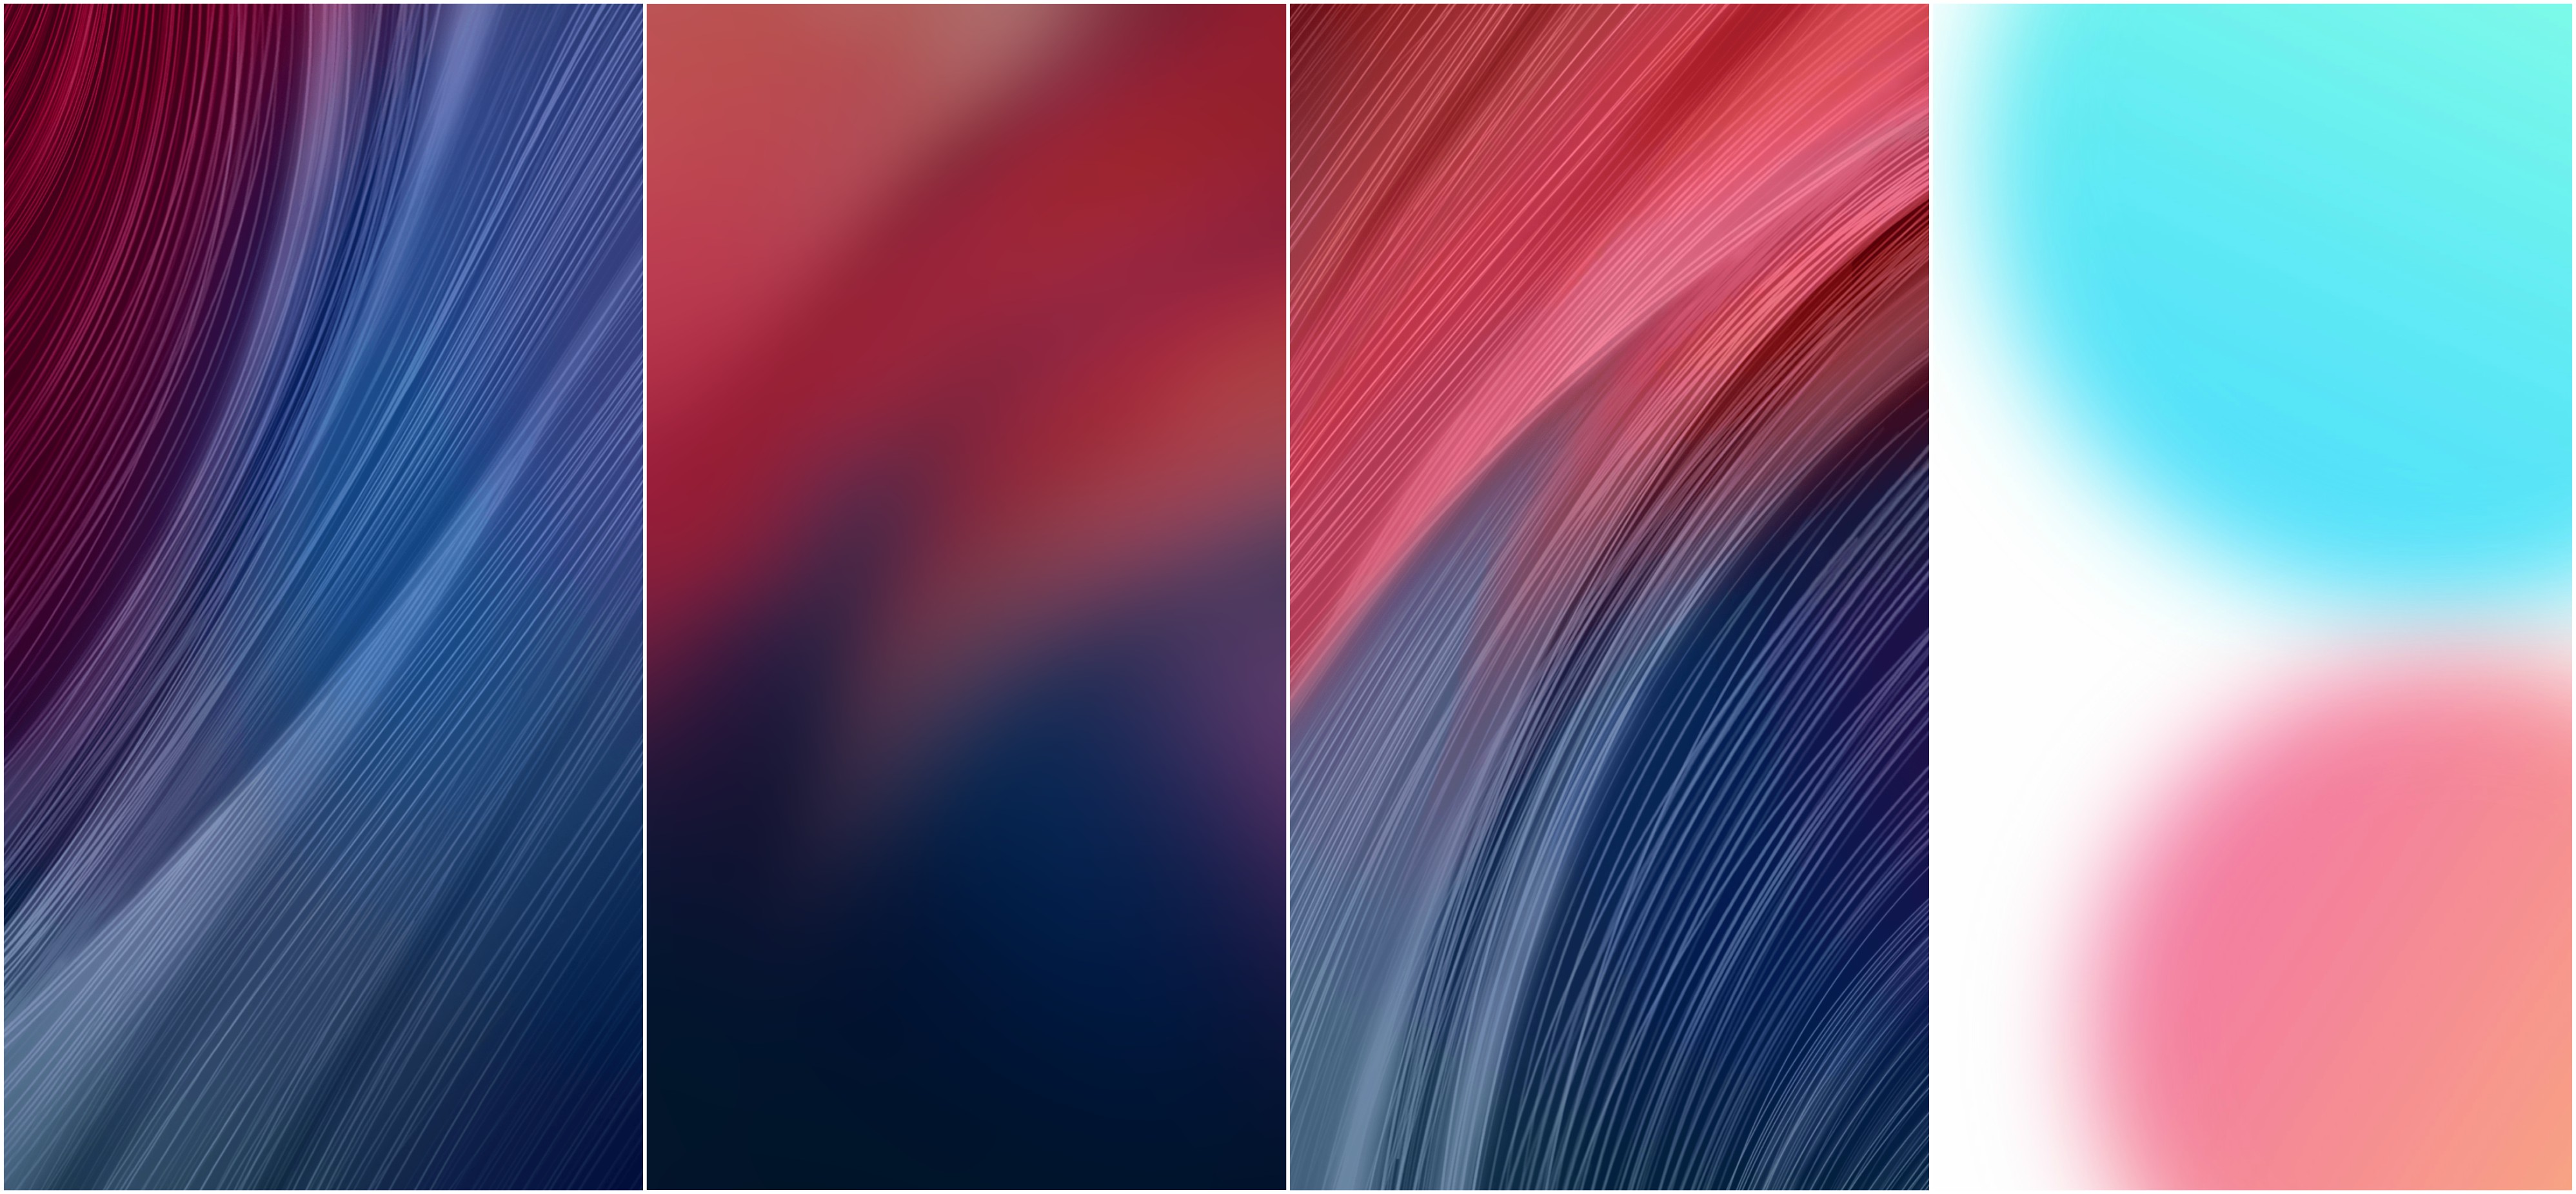 redmi note 3 stock wallpapers,blue,red,colorfulness,purple,violet